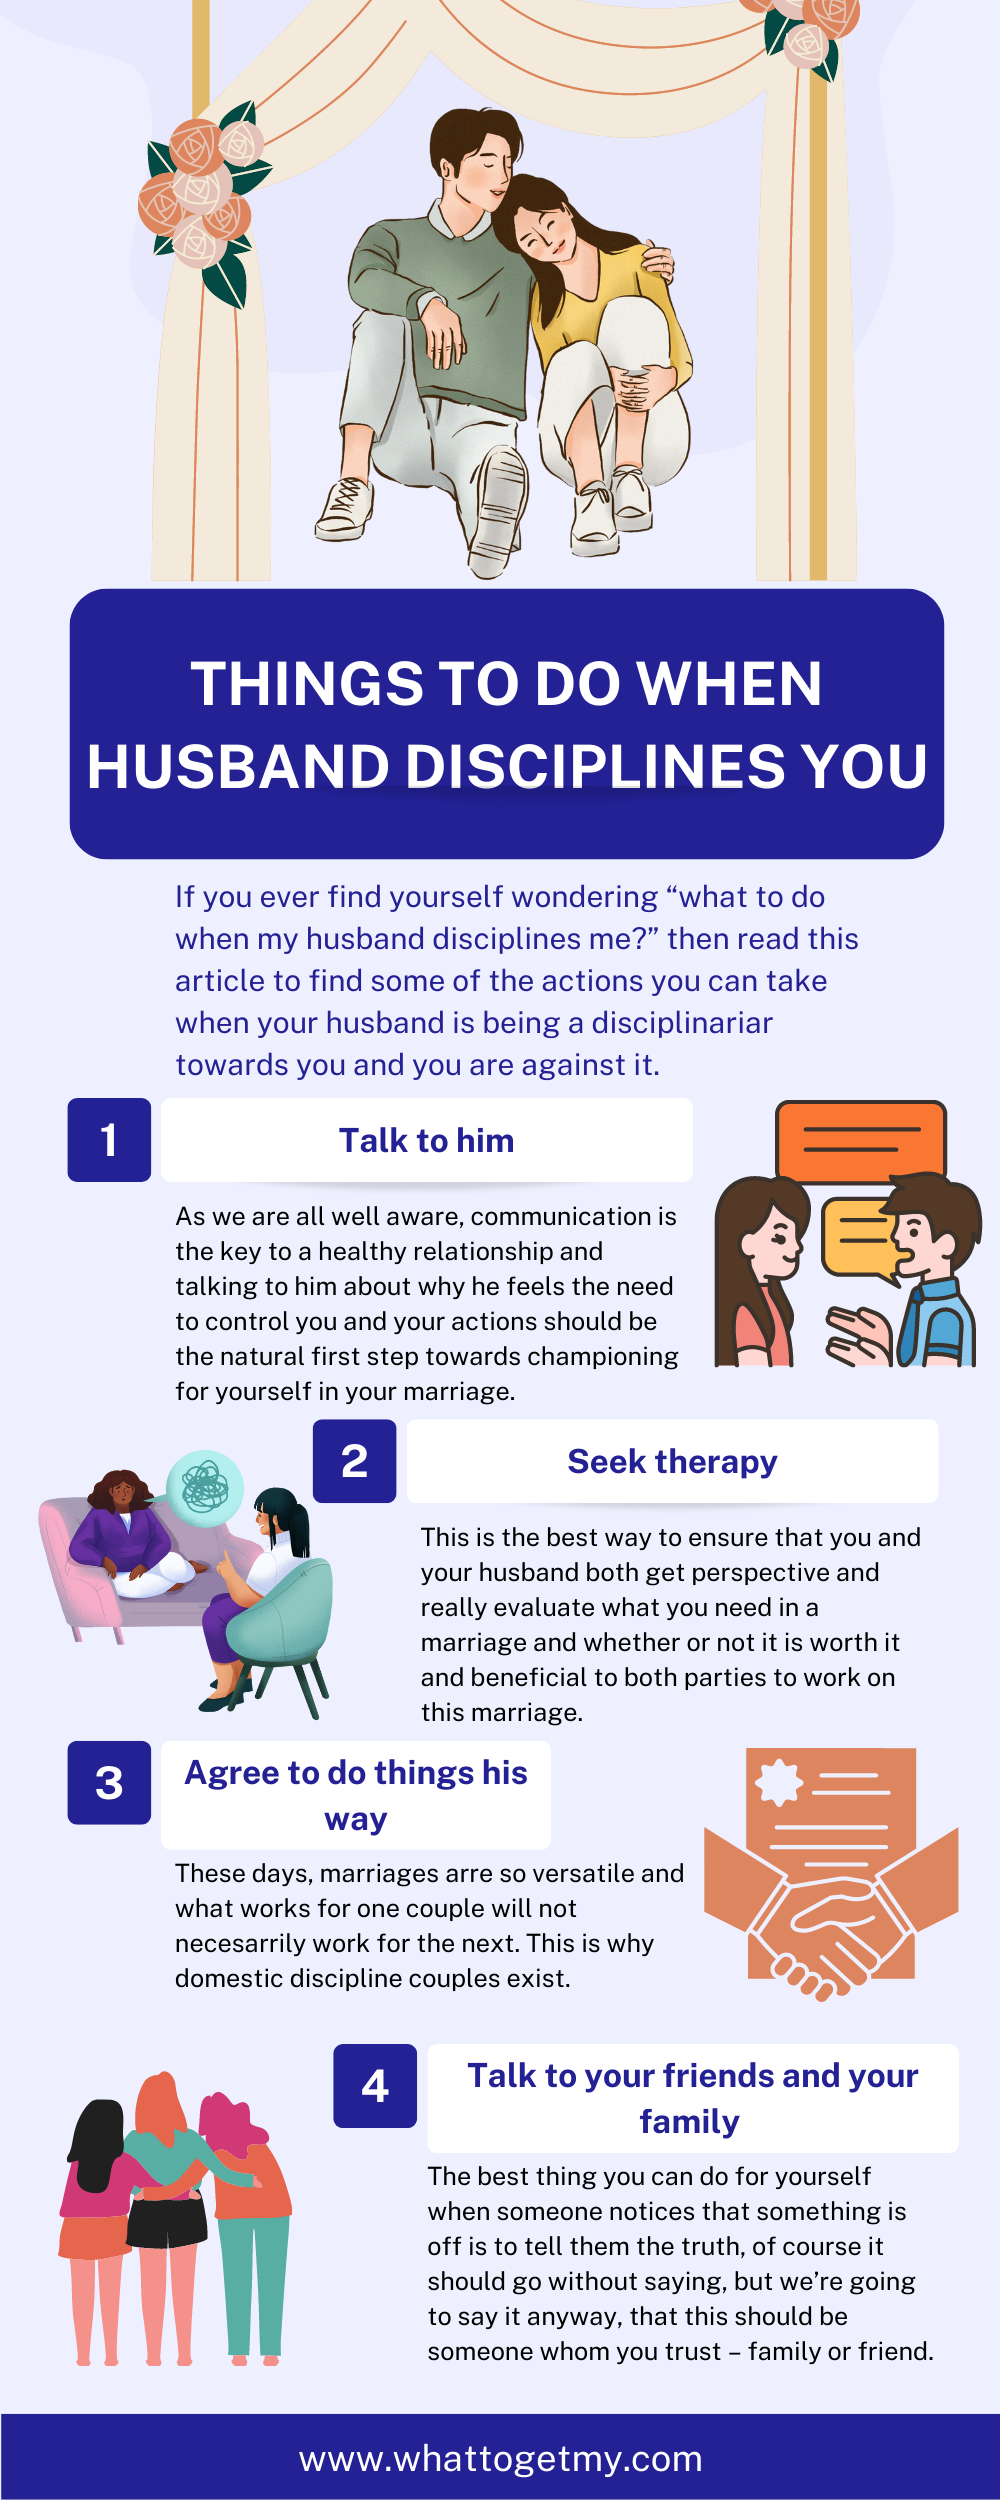 THINGS TO DO WHEN HUSBAND DISCIPLINES YOU